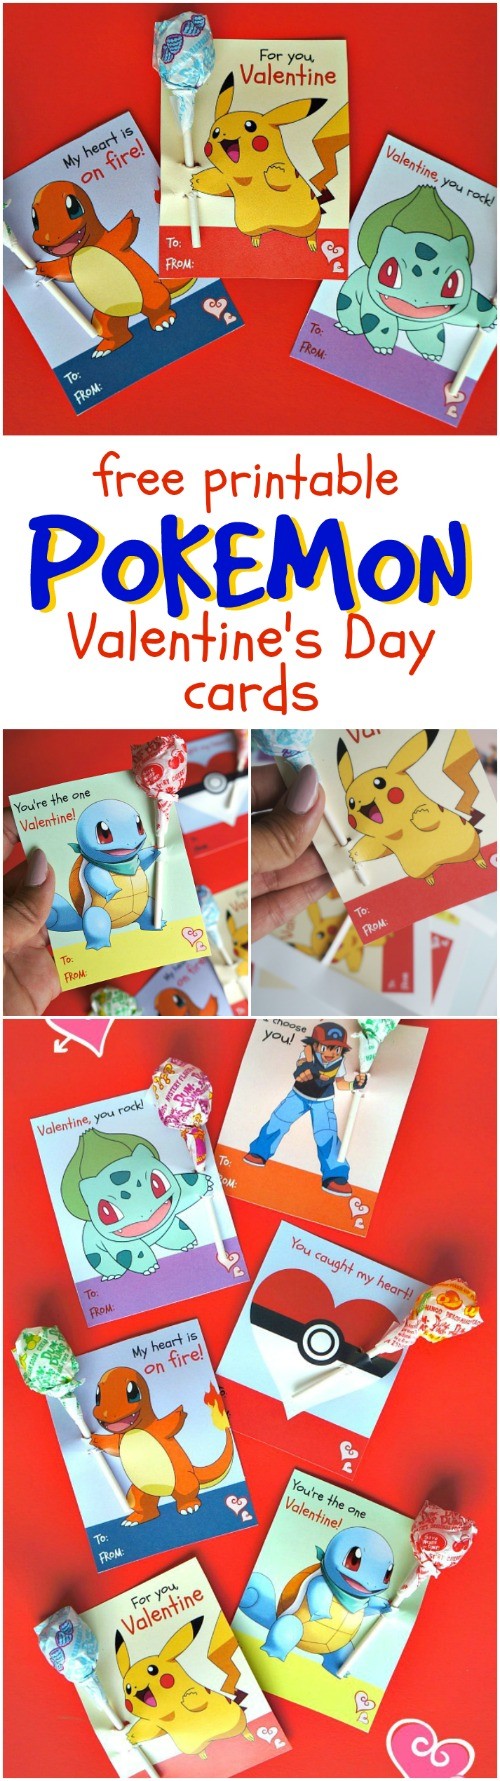 free-printable-pokemon-valentines-day-cards-6-designs-with-lollipops